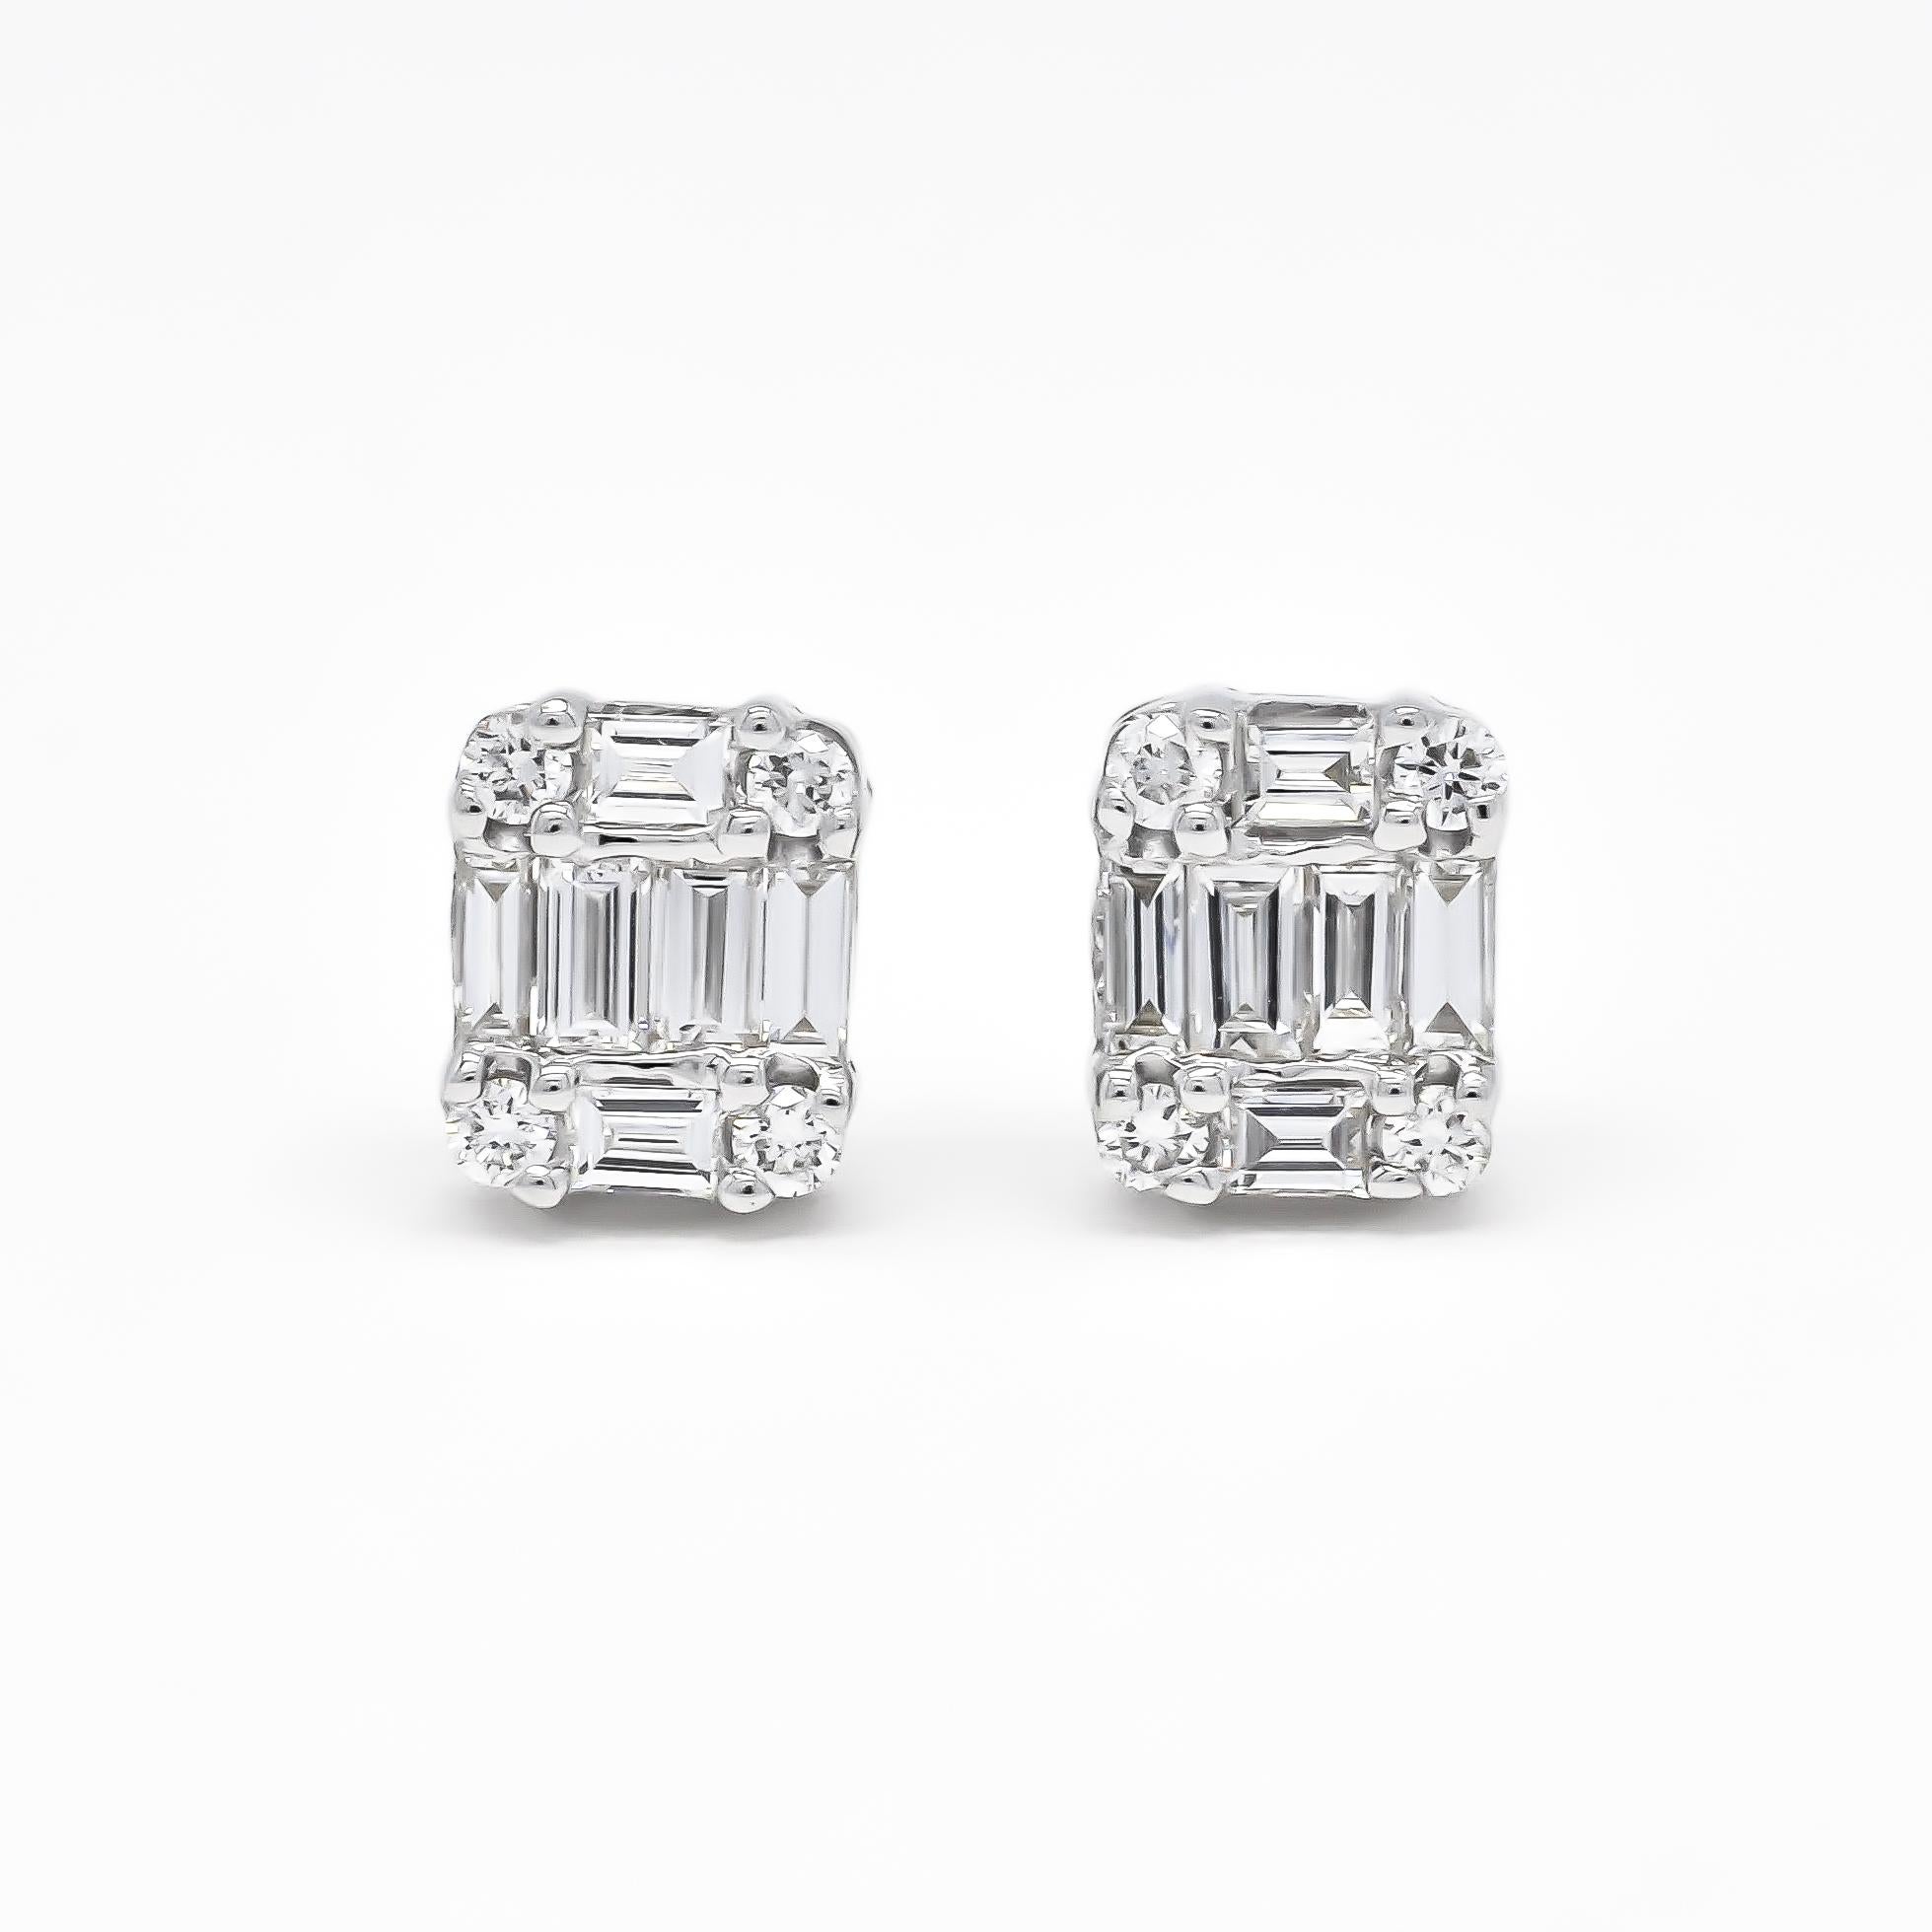 Transform your jewelry collection with our exquisite Natural Baguette Diamond Cluster Stud Earrings, crafted to elevate your style with elegance and ethical luxury. These stunning earrings feature a cluster of baguette and round diamonds,